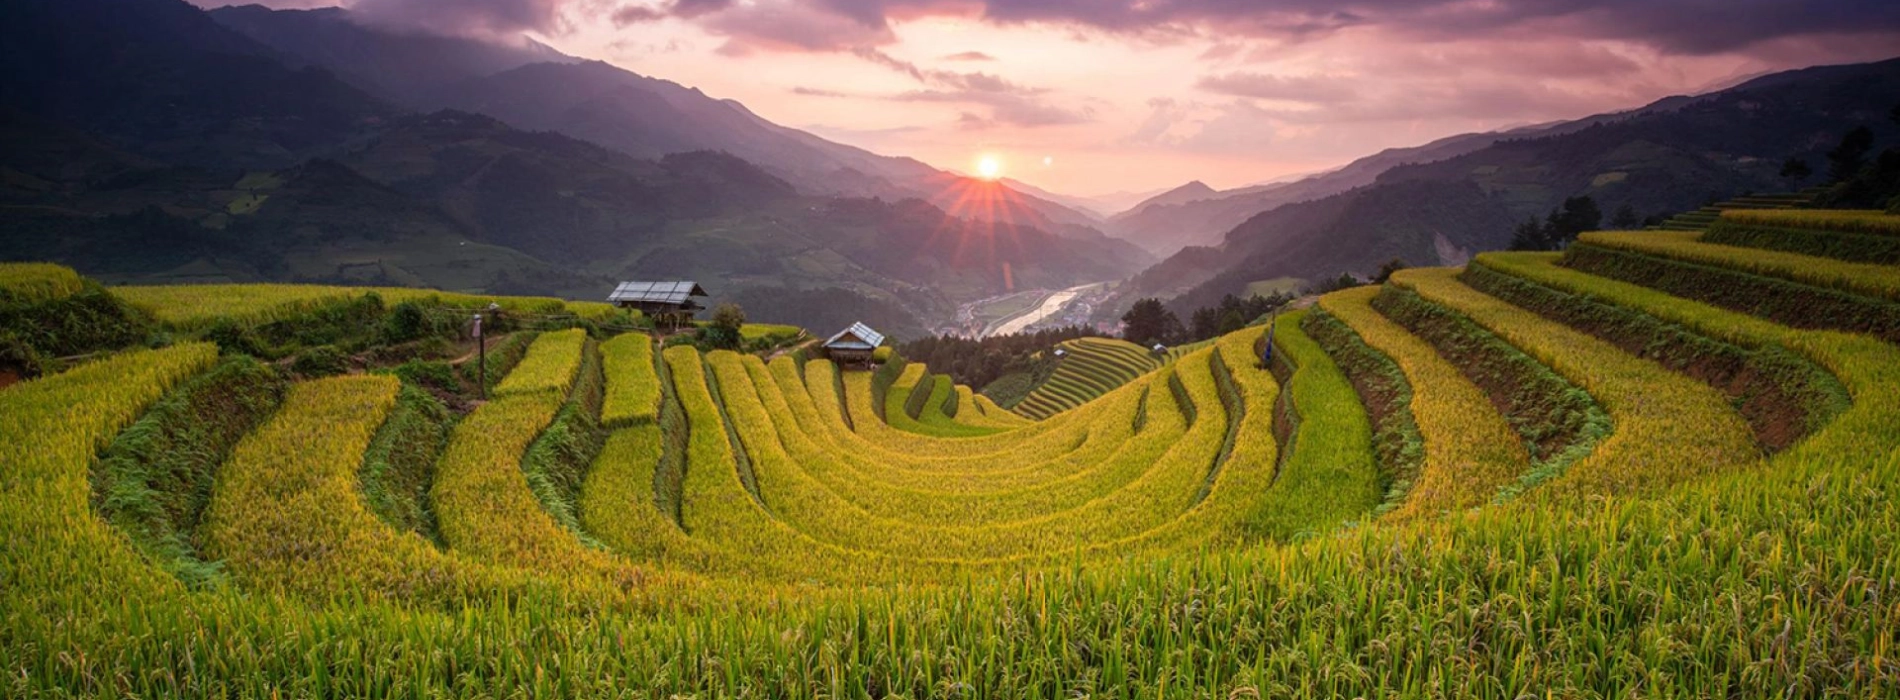 Is Mu Cang Chai really a must-visit in Vietnam?